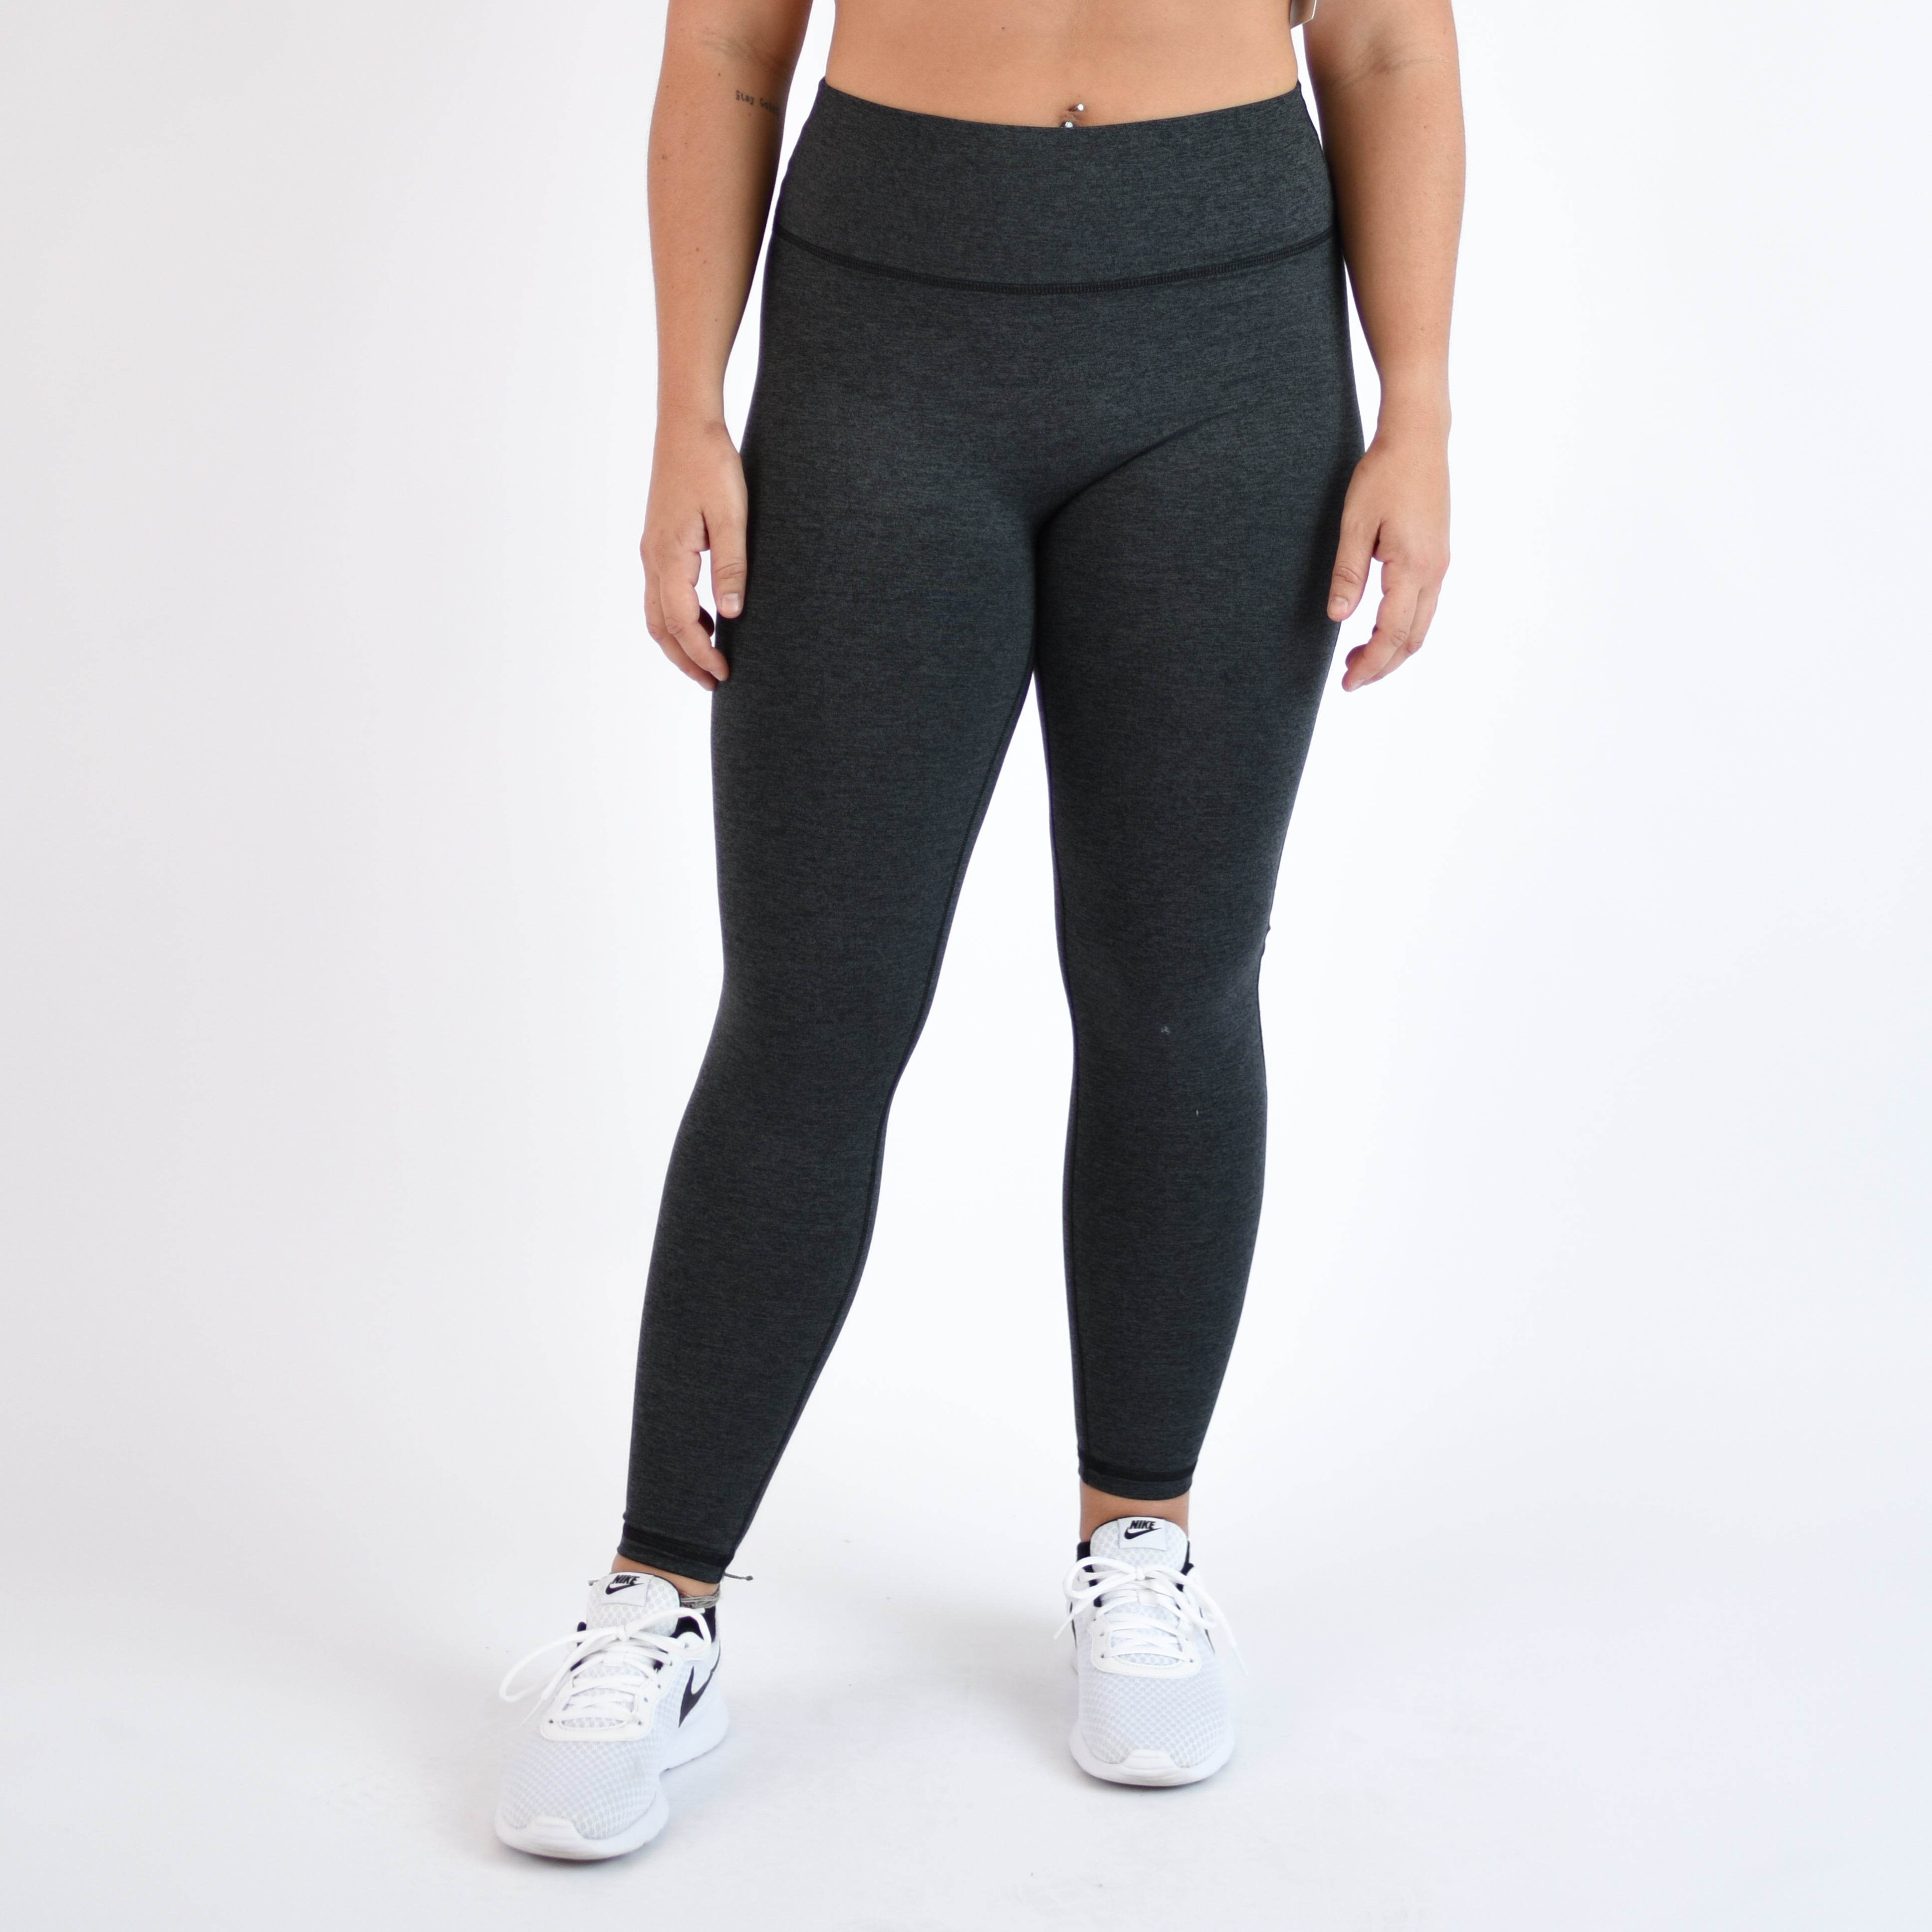 Charge Legging 25- No Front Seam - Higher Rise